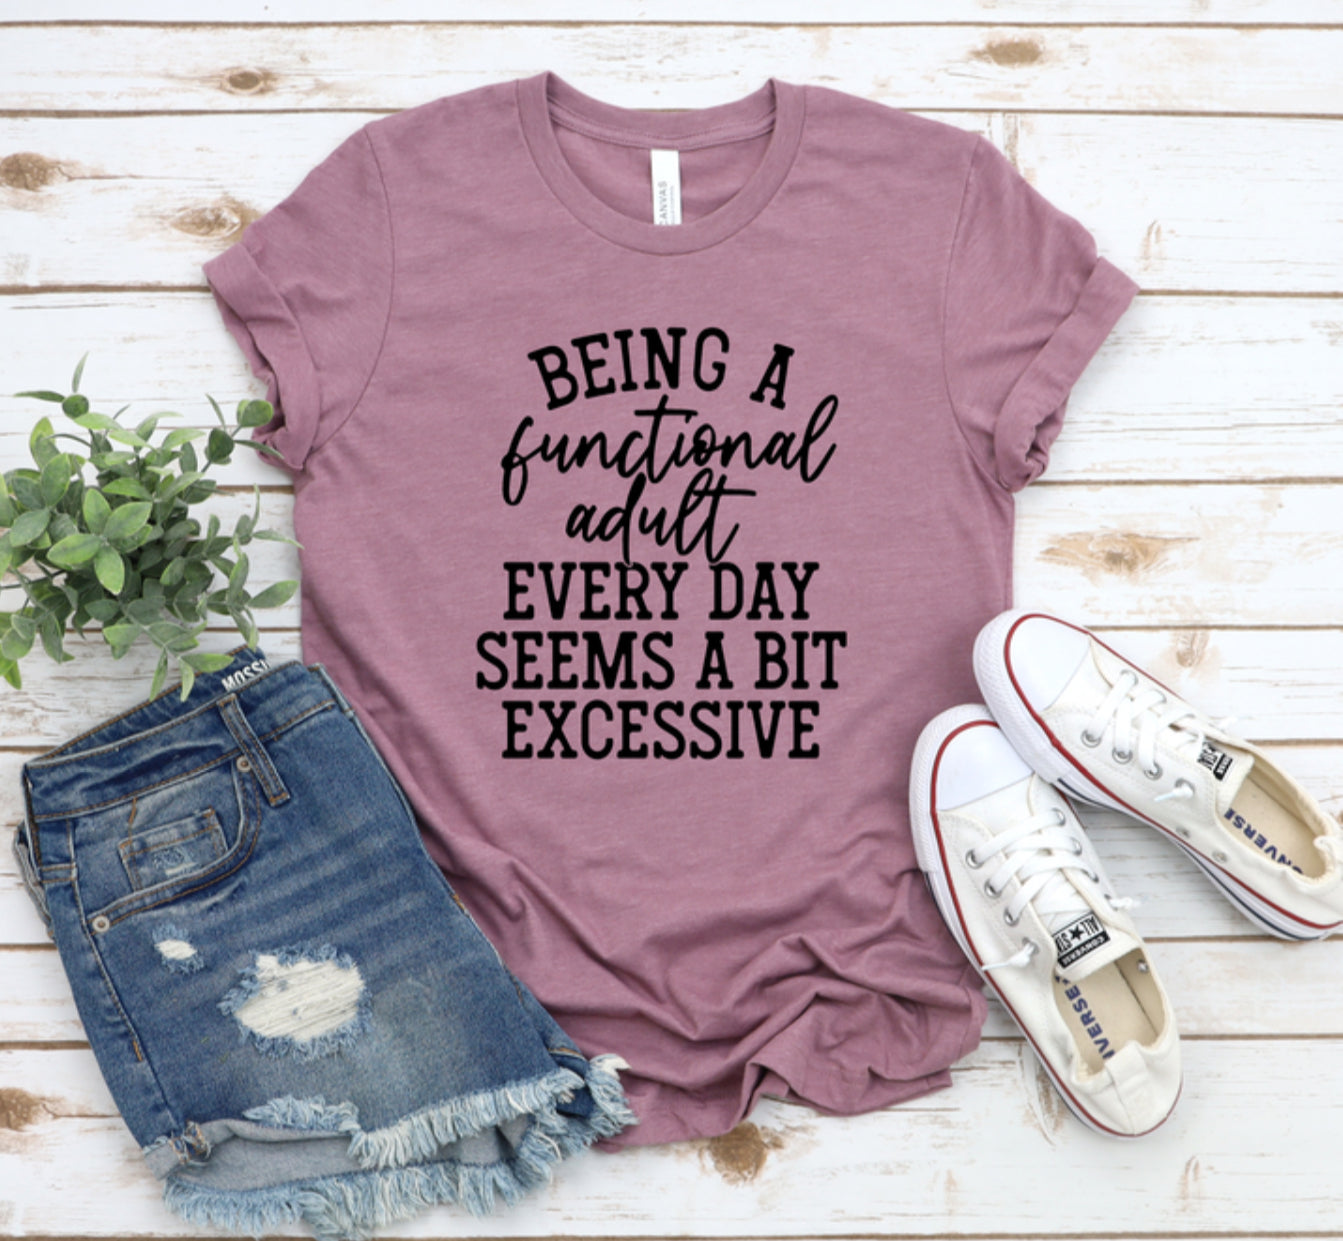 BEING A FUNCTIONAL ADULT EVERYDAY SEEMS A BIT EXCESSIVE